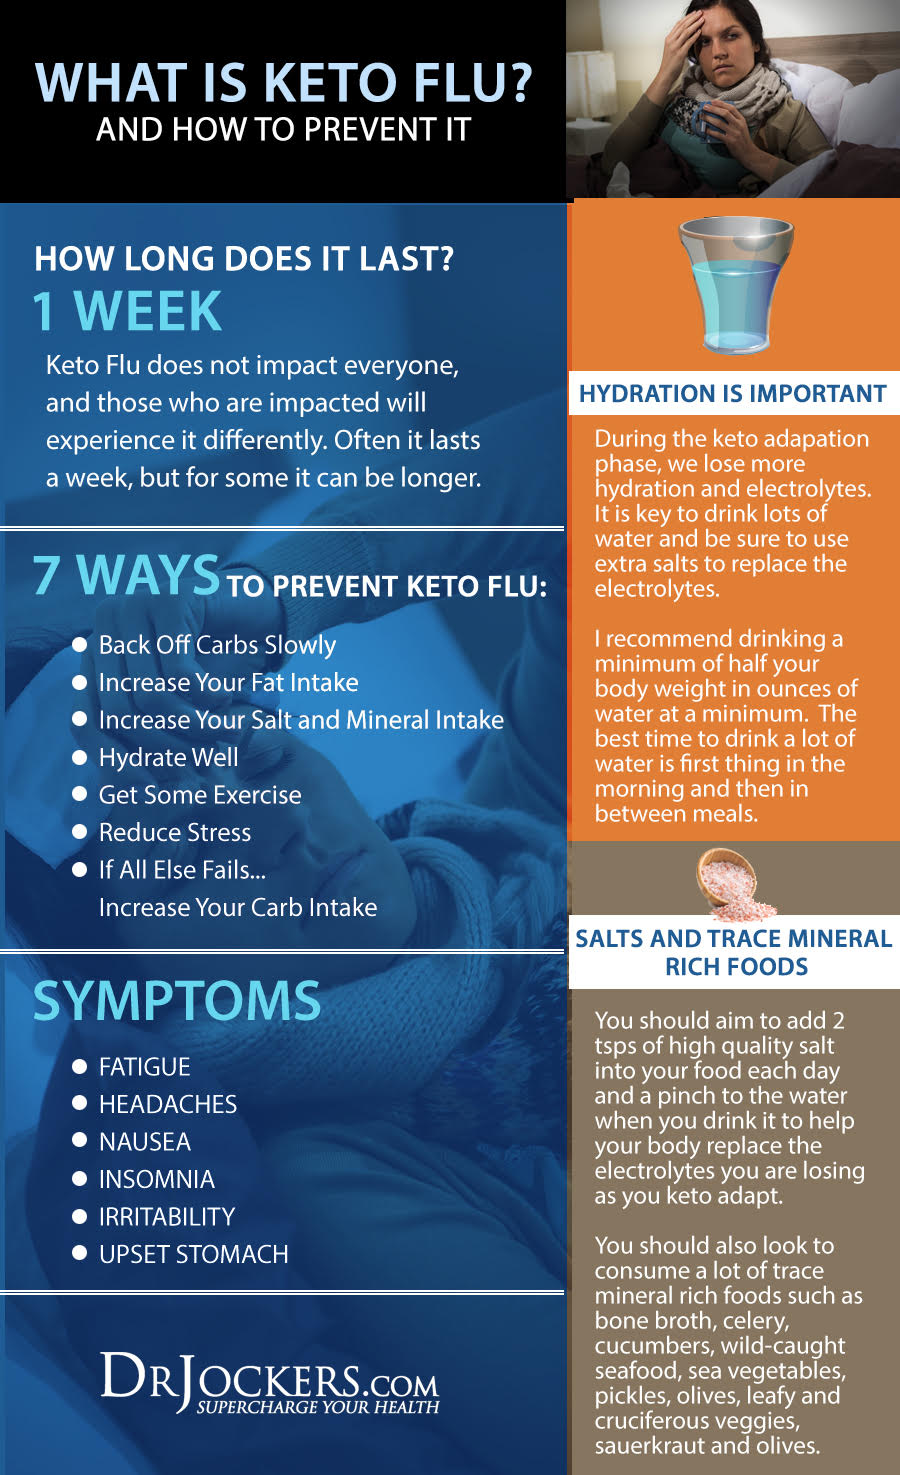 rheumatoid arthritis diet, Rheumatoid Arthritis Diet: Is Keto the Way?